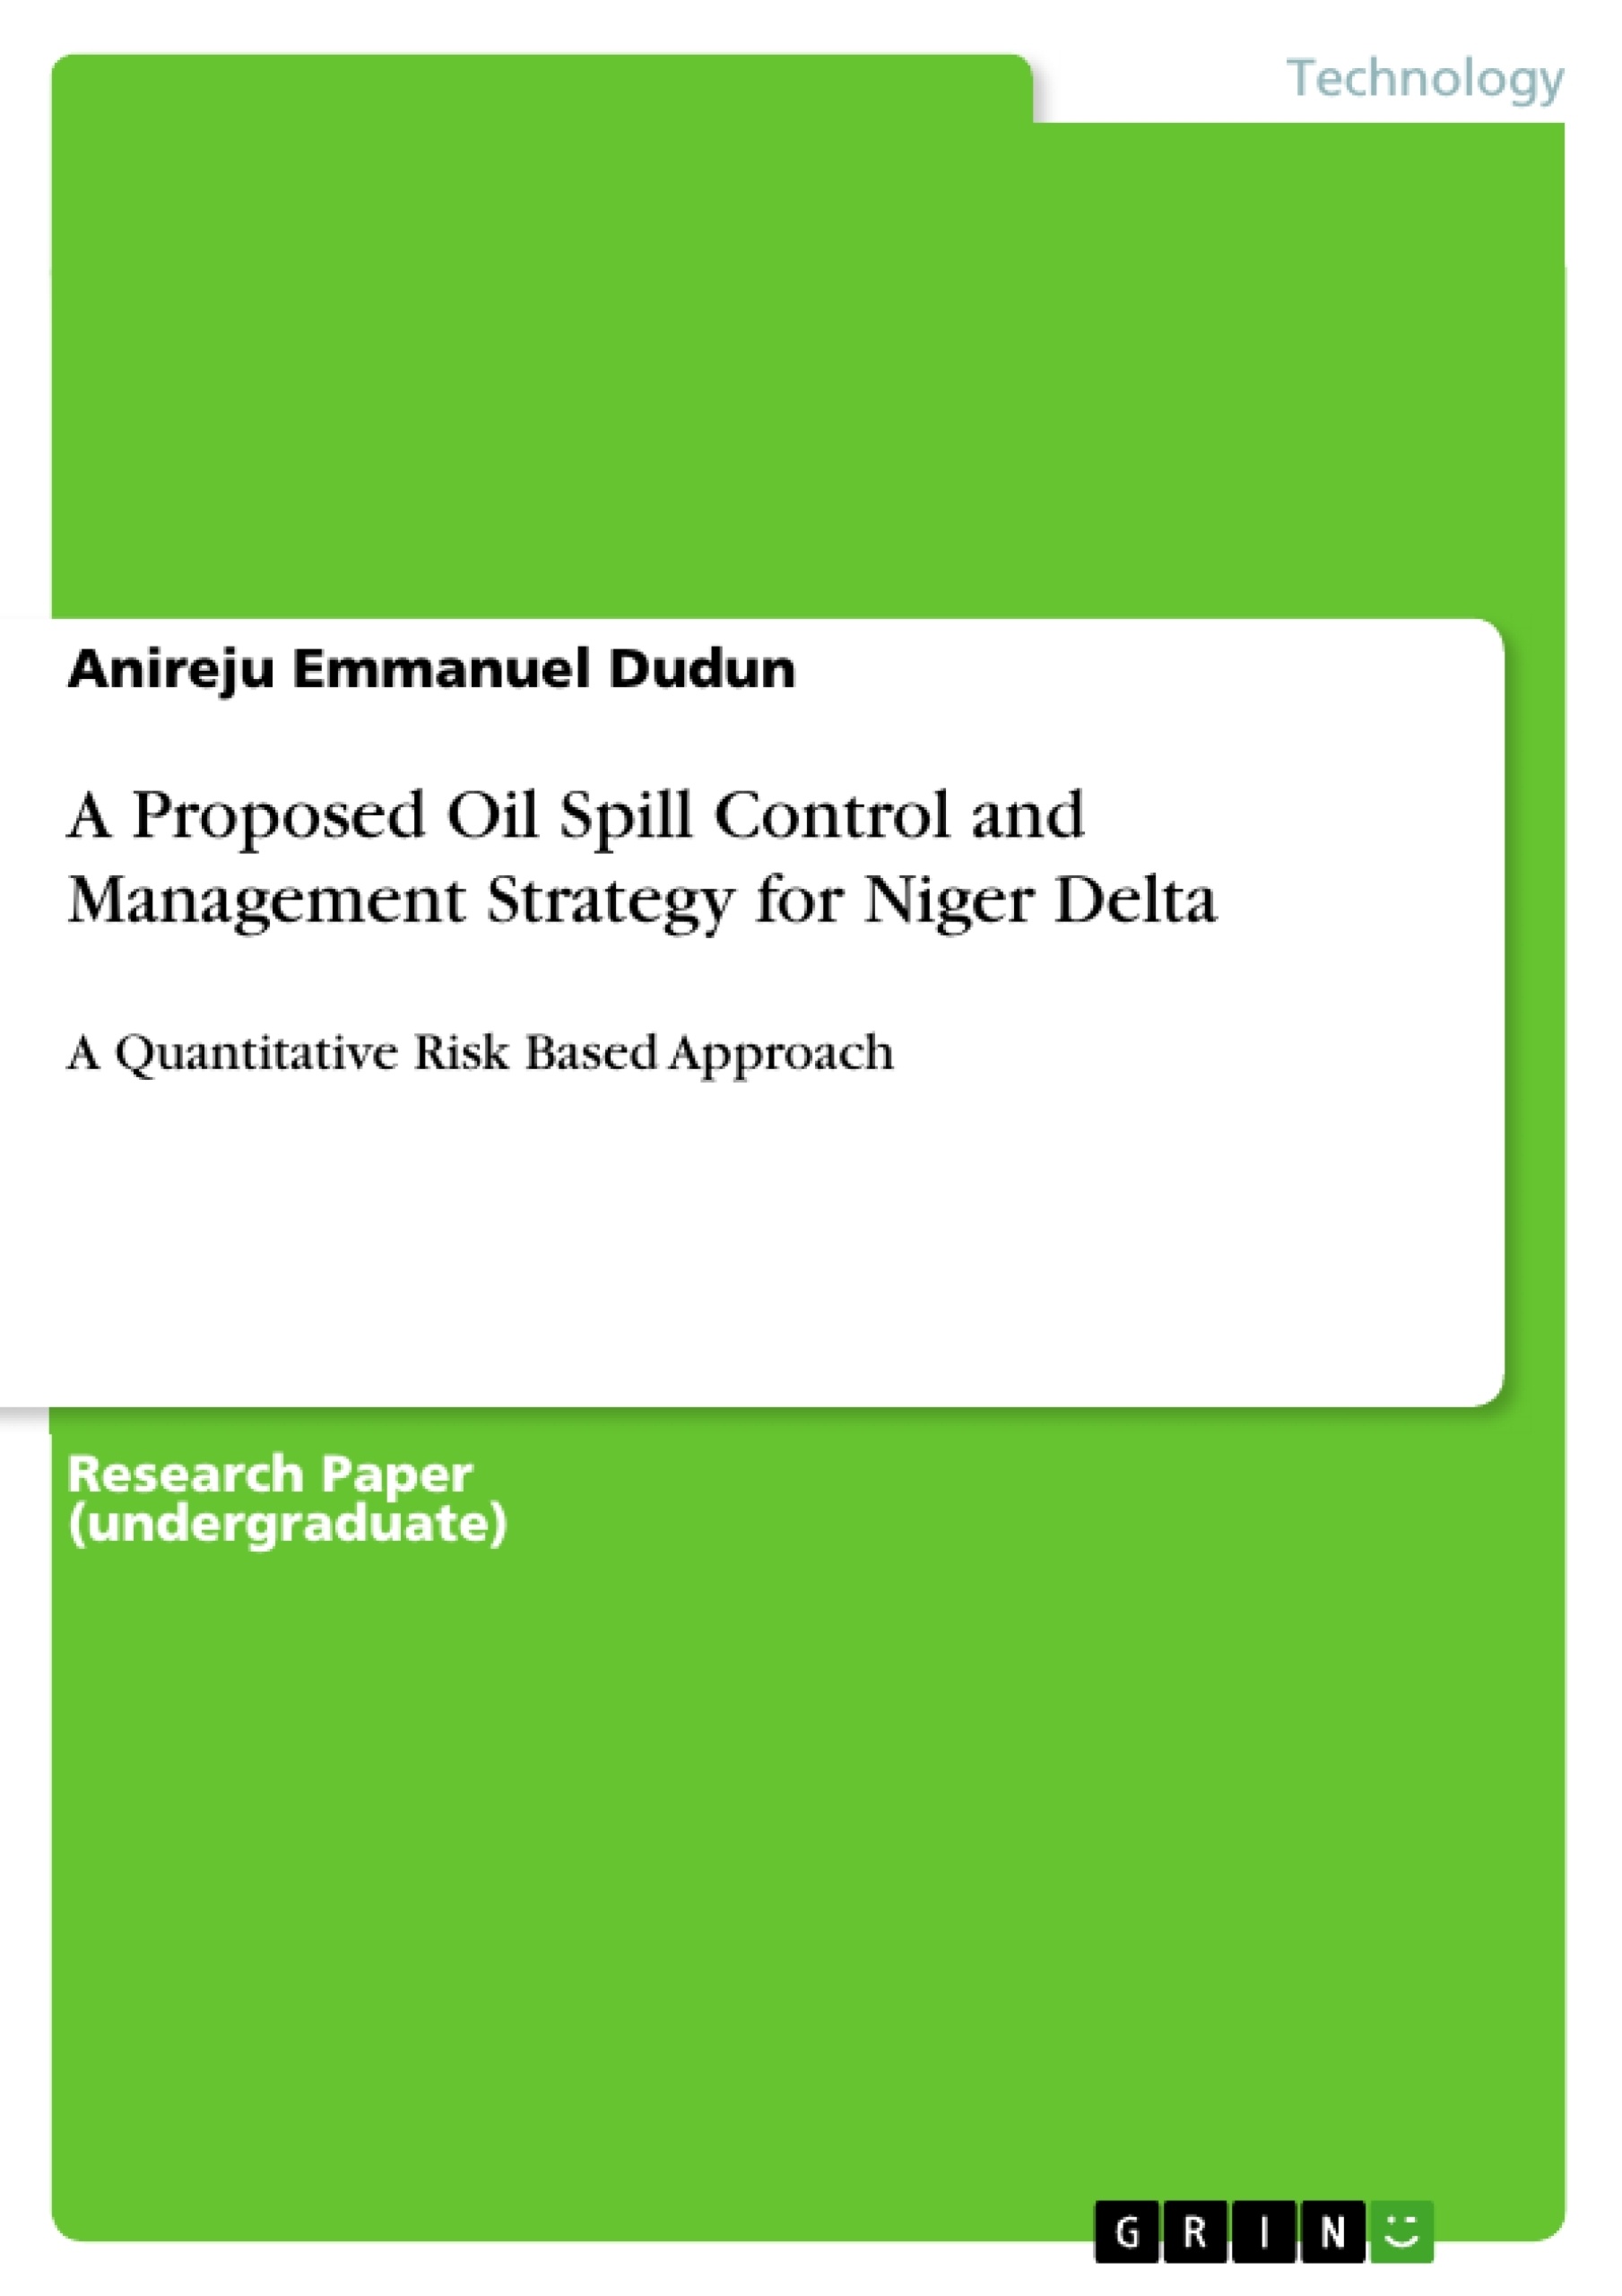 Título: A Proposed Oil Spill Control and Management Strategy for Niger Delta